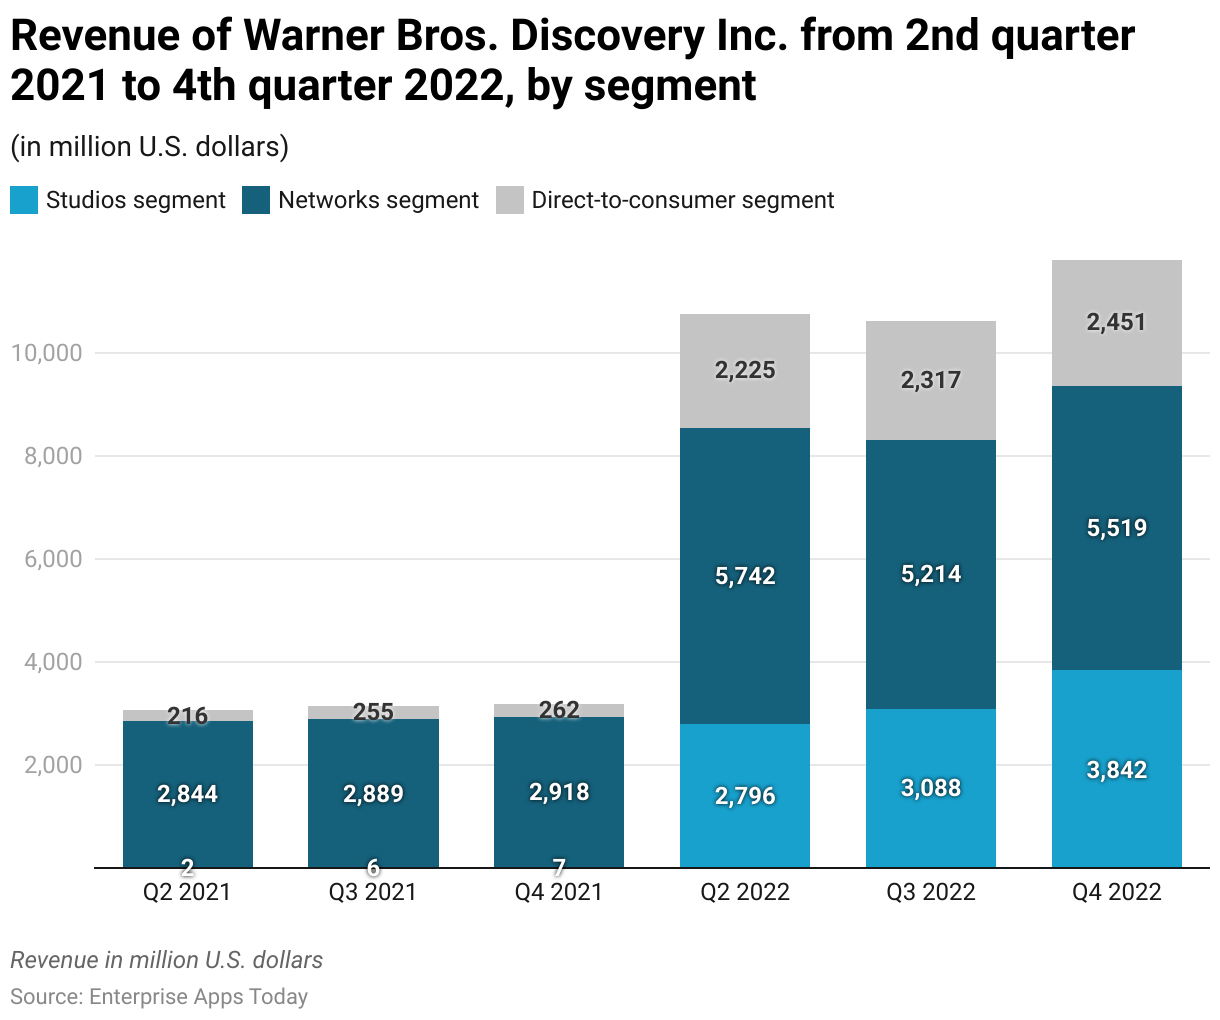 Revenue of Warner Bros. Discovery Inc. from 2nd quarter 2021 to 4th quarter 2022, by segment